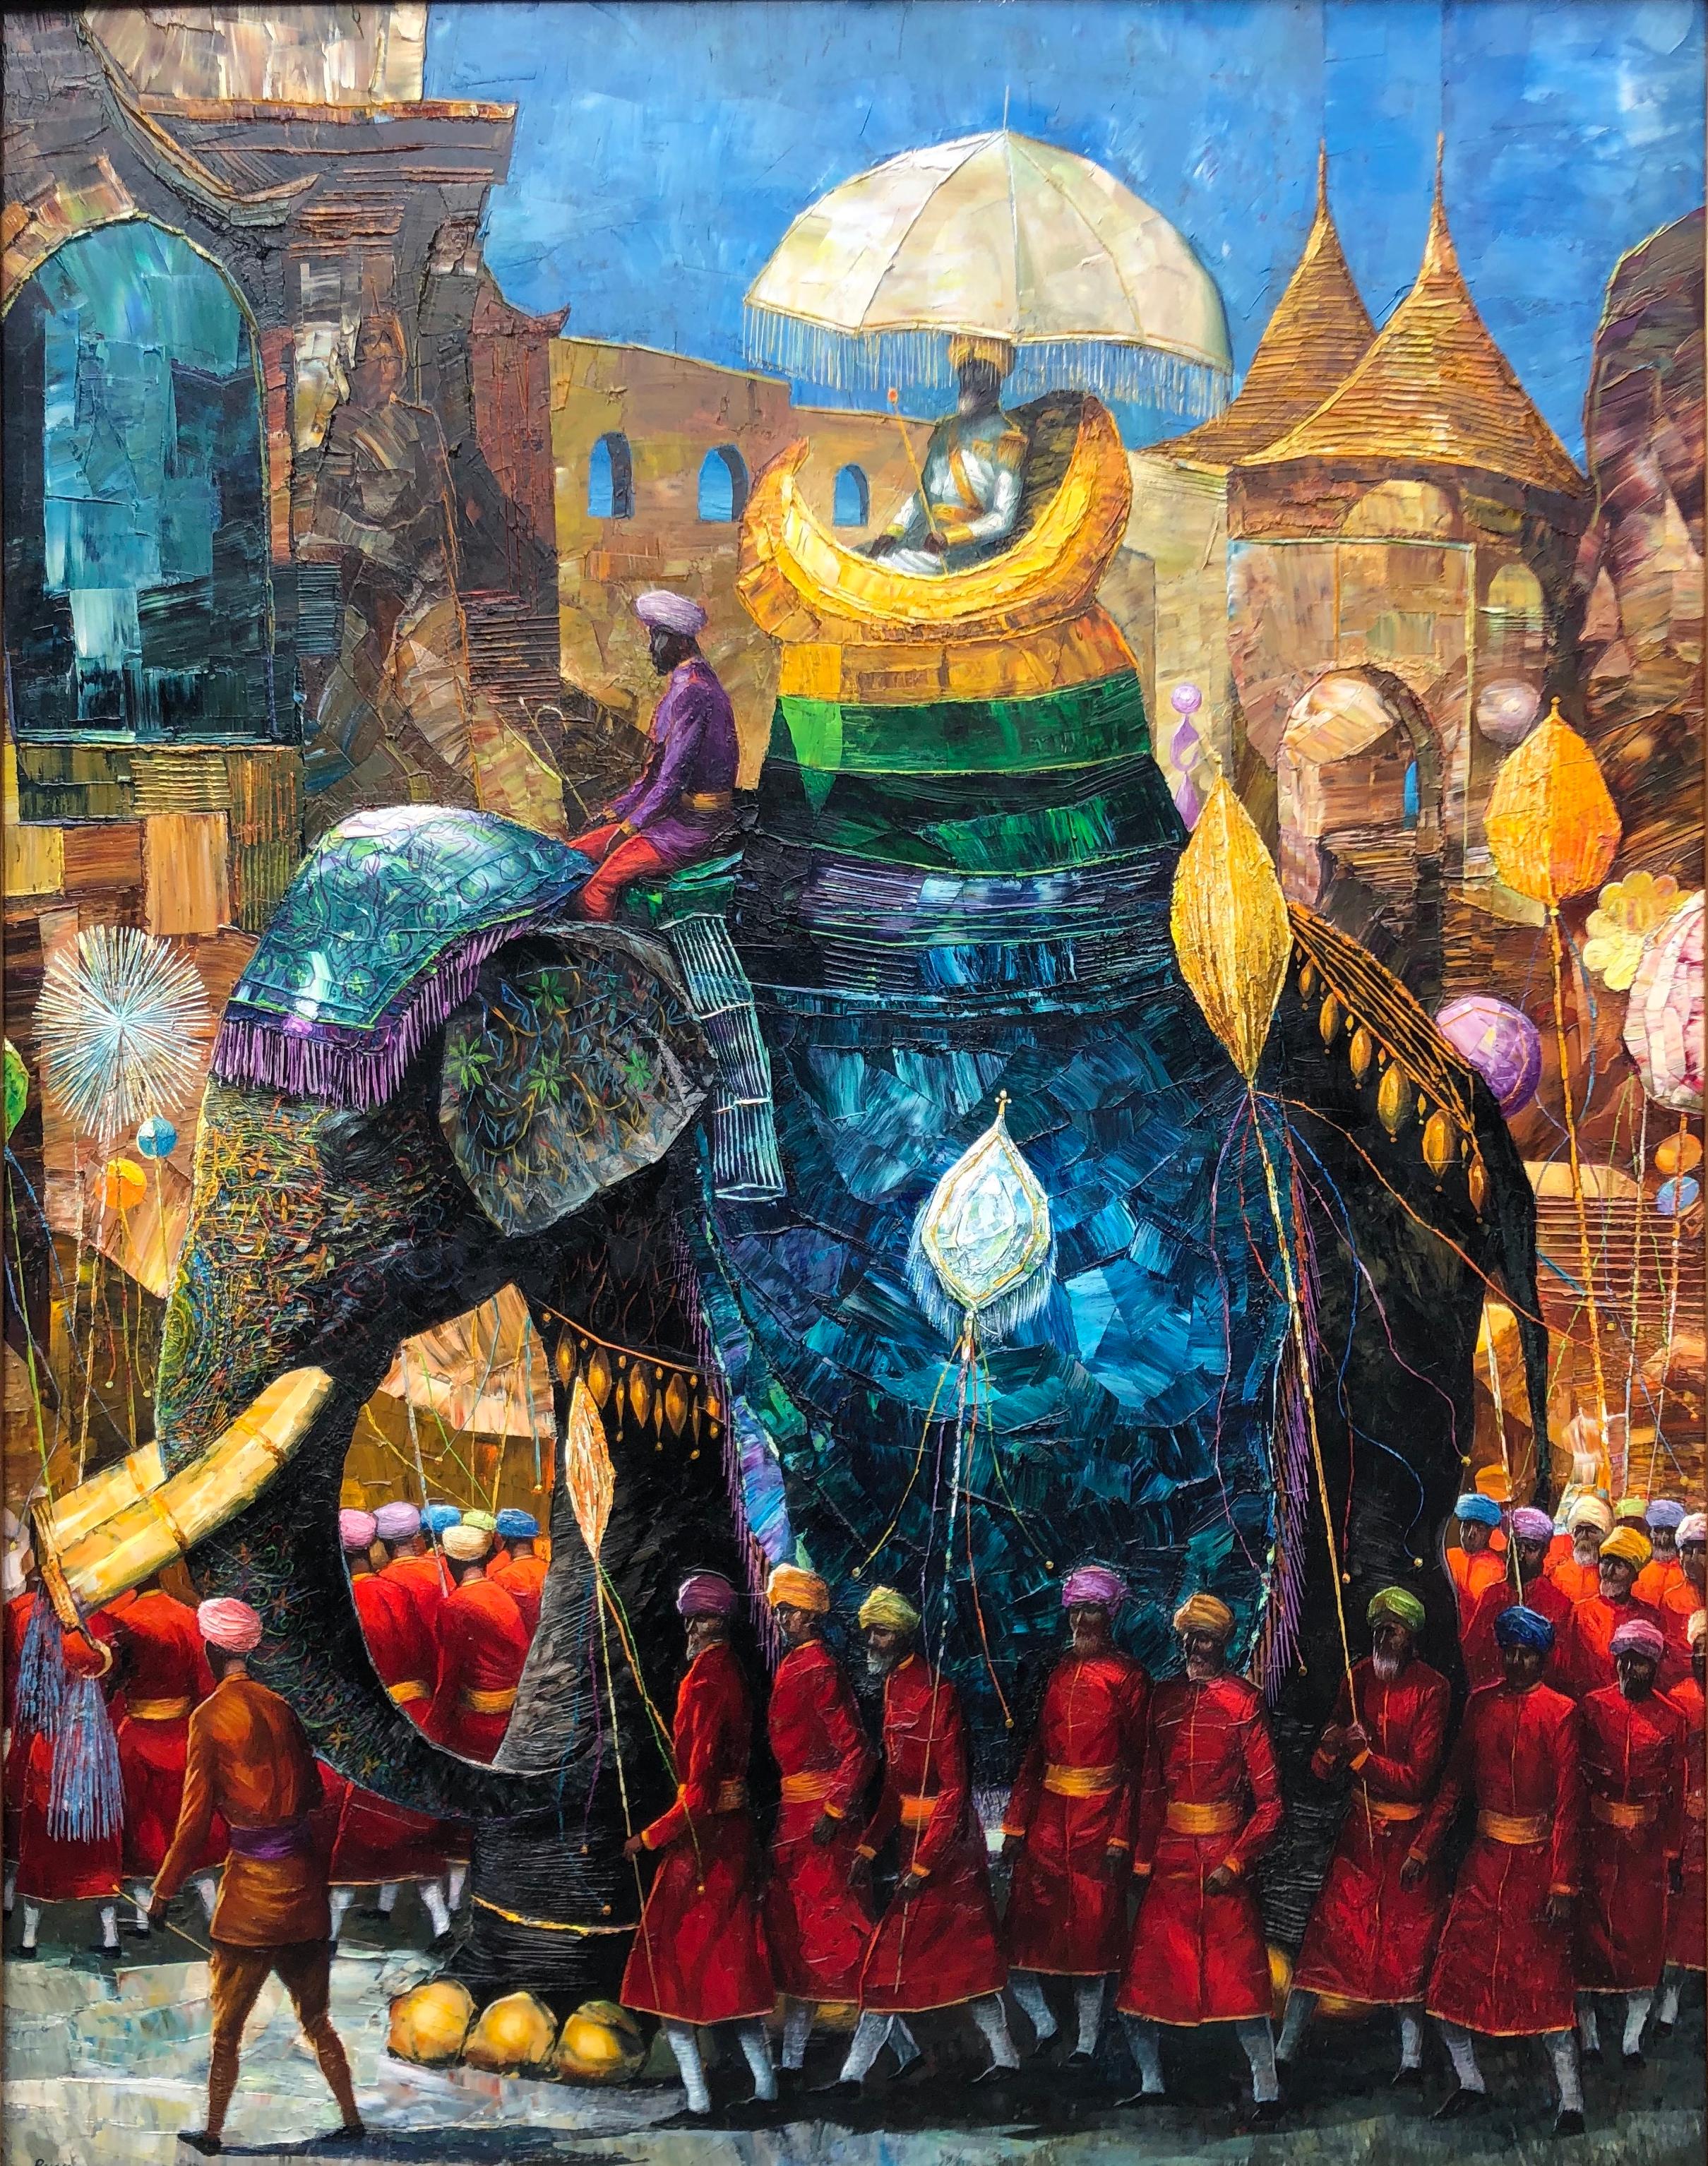 Procession With Elephant  - Painting by George Russin